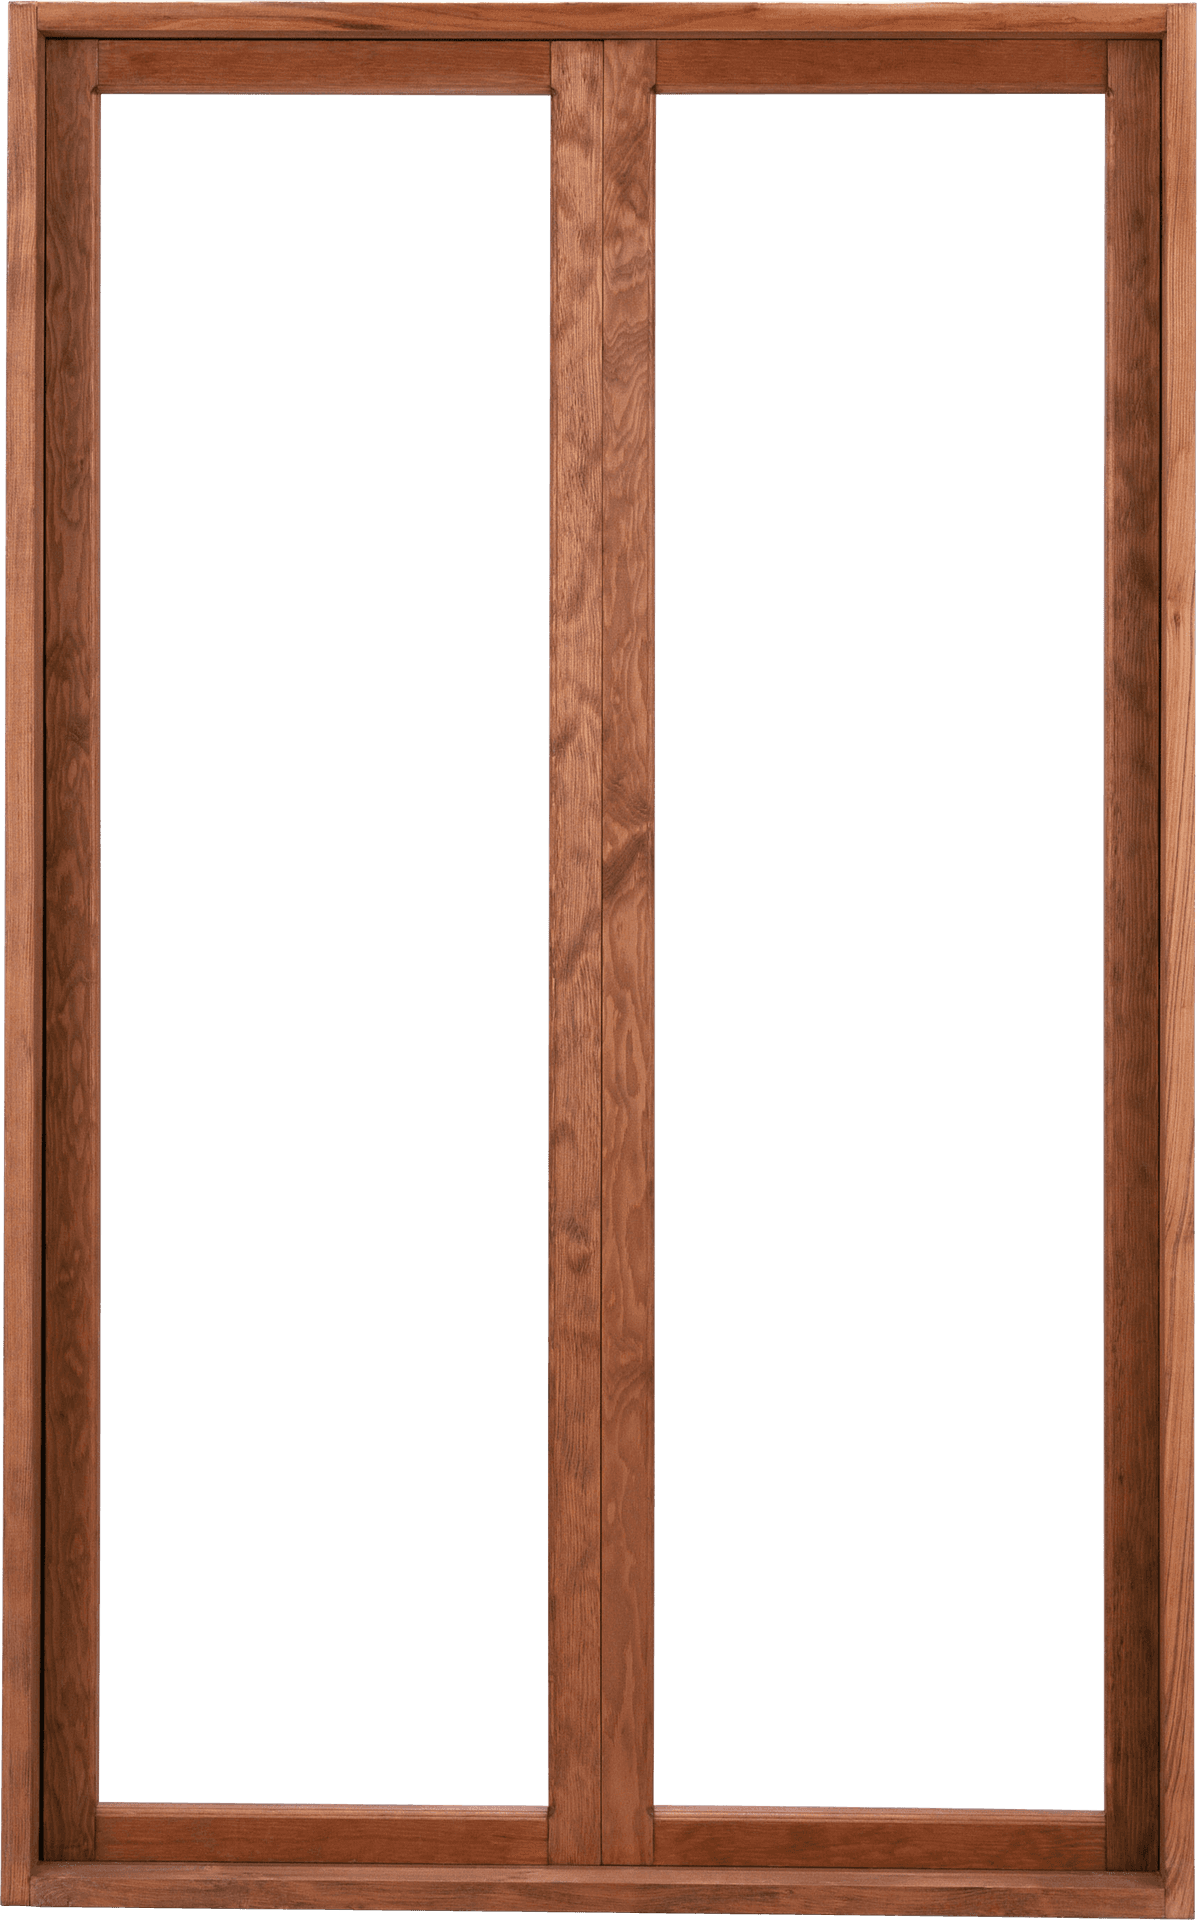 Double Panel Wooden Window Frame PNG image